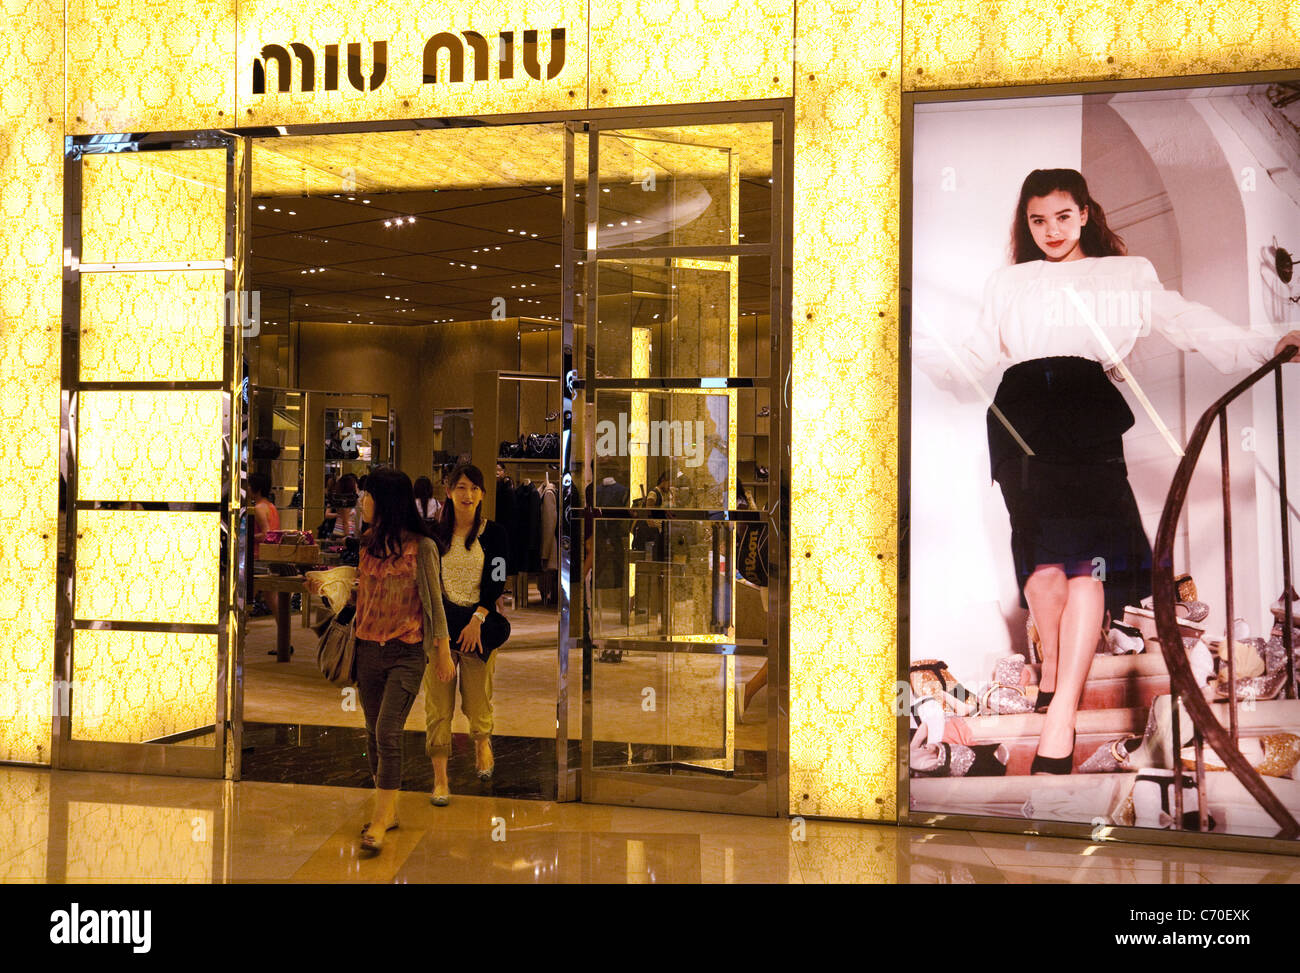 Customers at the entrance to the Miu Miu fashion store, the Ion shopping Mall, Singapore asia Stock Photo